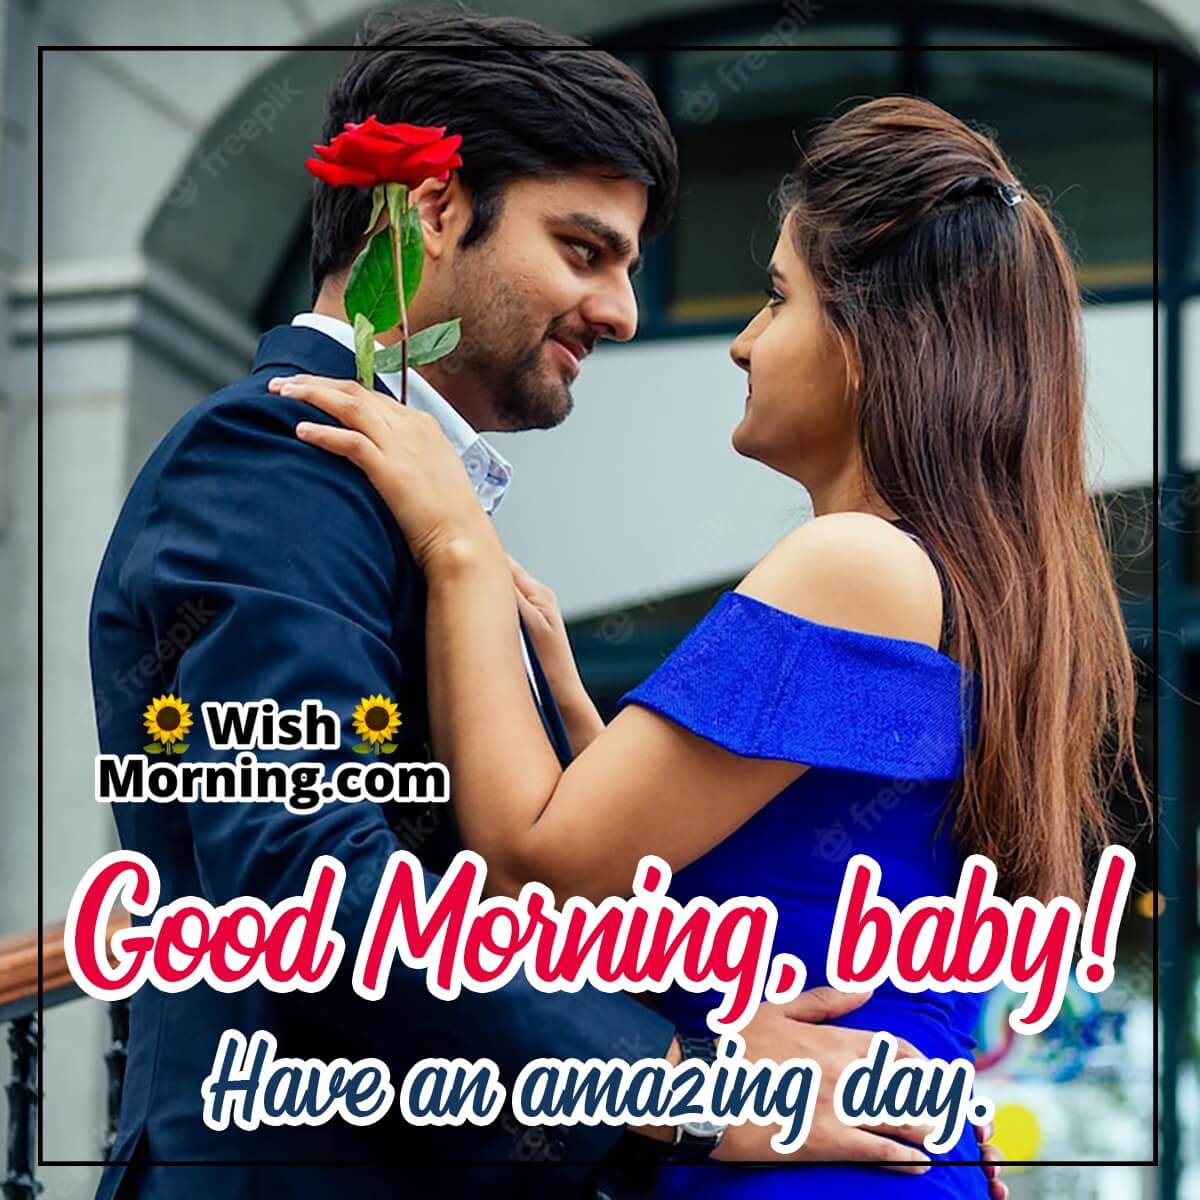 Astonishing Collection of Top 999+ Good Morning Baby Images in Full 4K ...